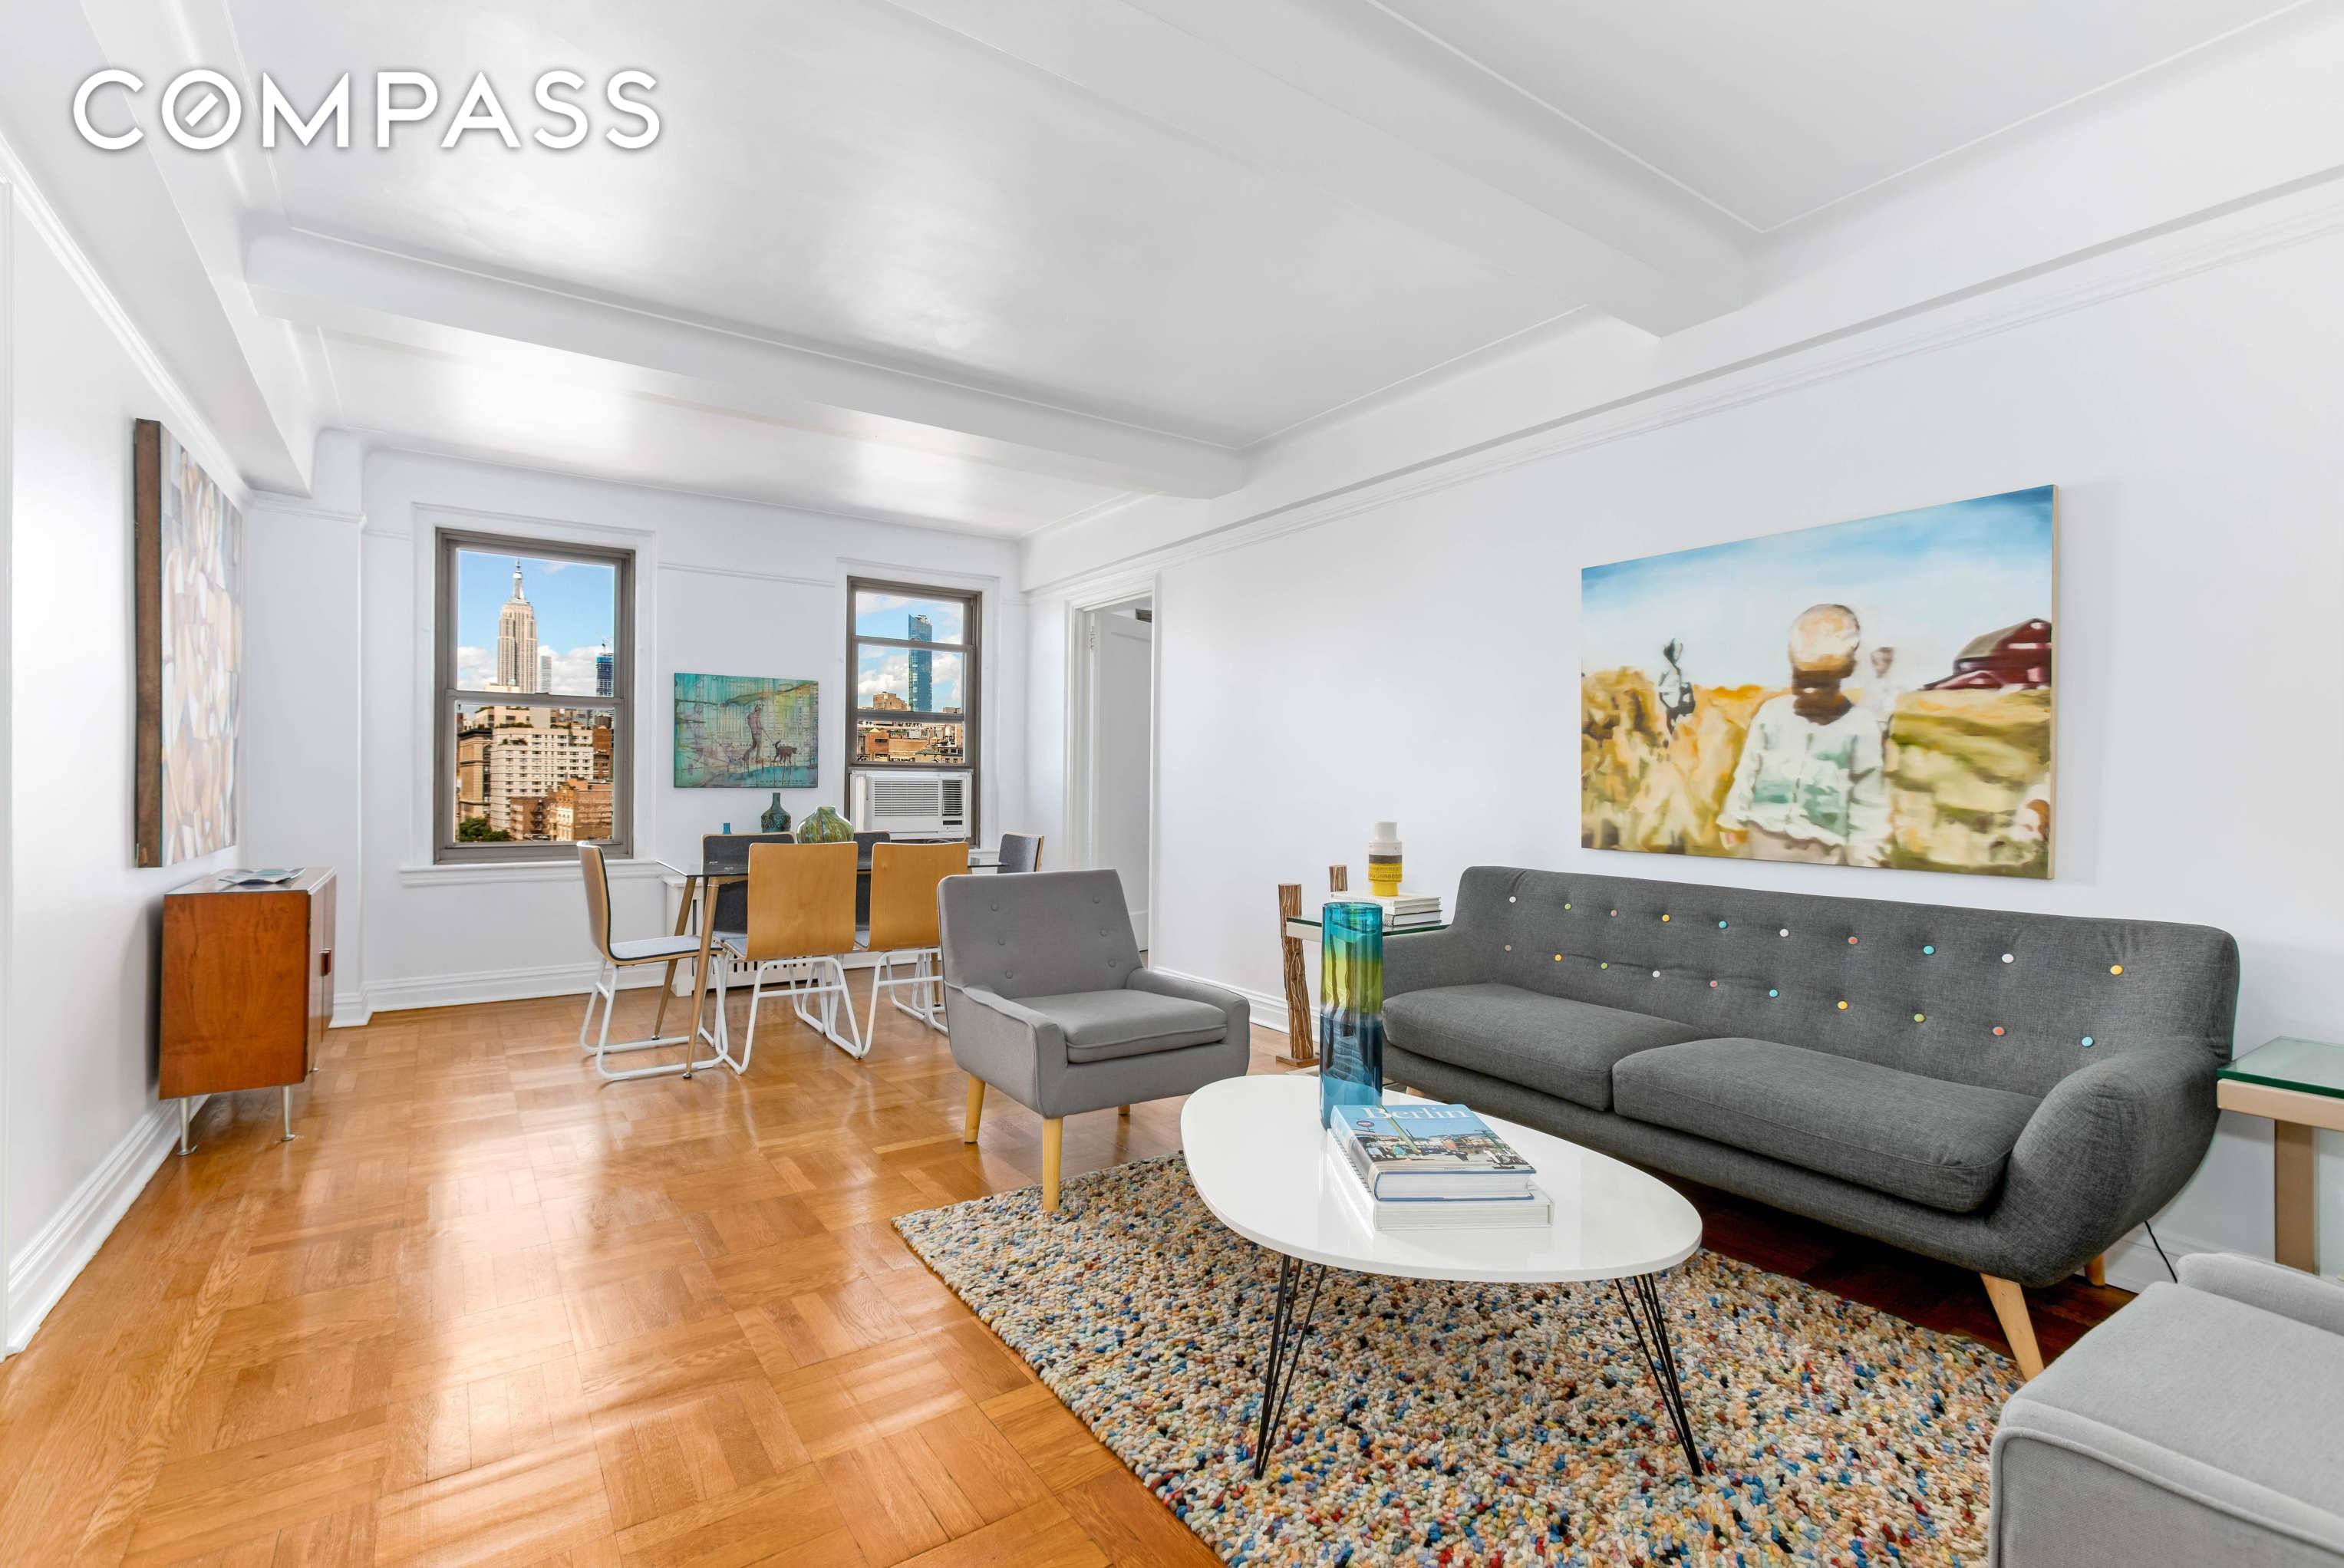 Breathtaking skyline views and extraordinary storage space fill every room of this spacious one bedroom, one bathroom cooperative in an ideal West Village location.